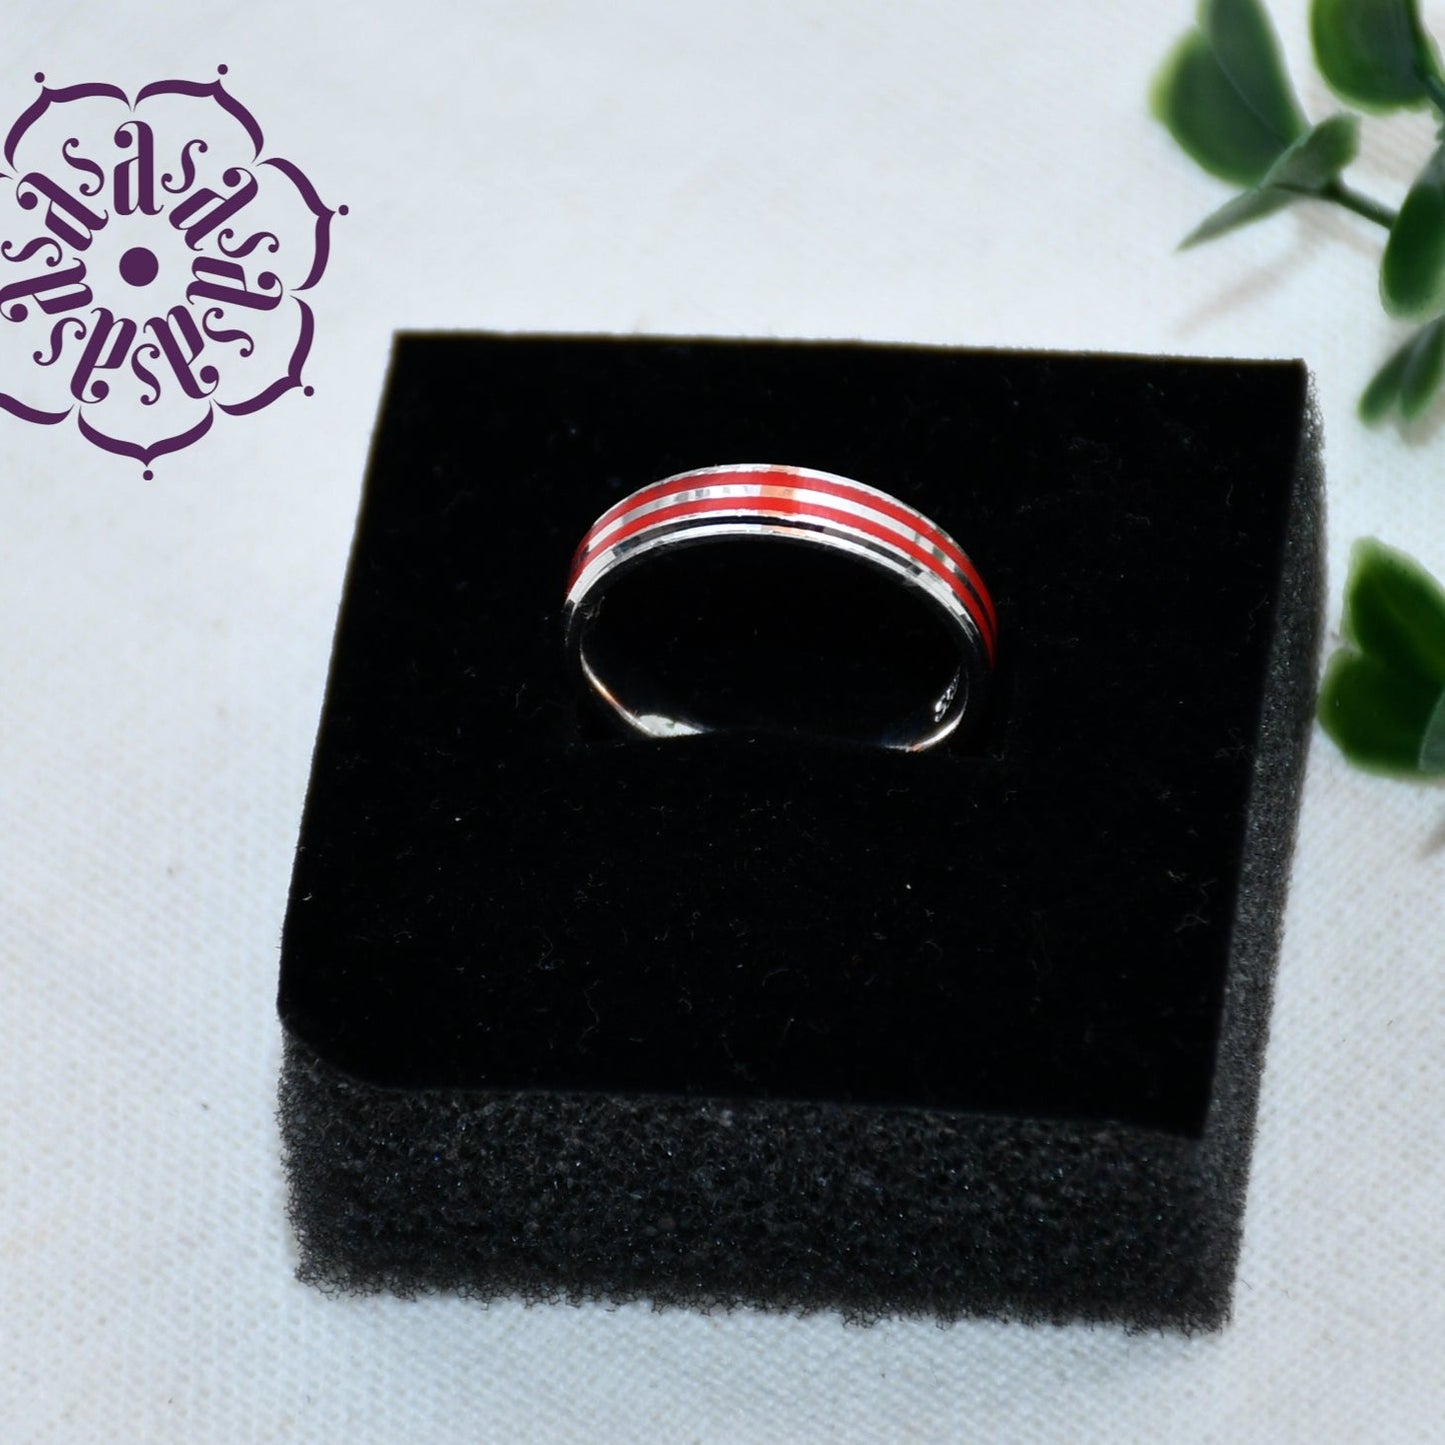 PLAIN RING WITH RED STRIPS